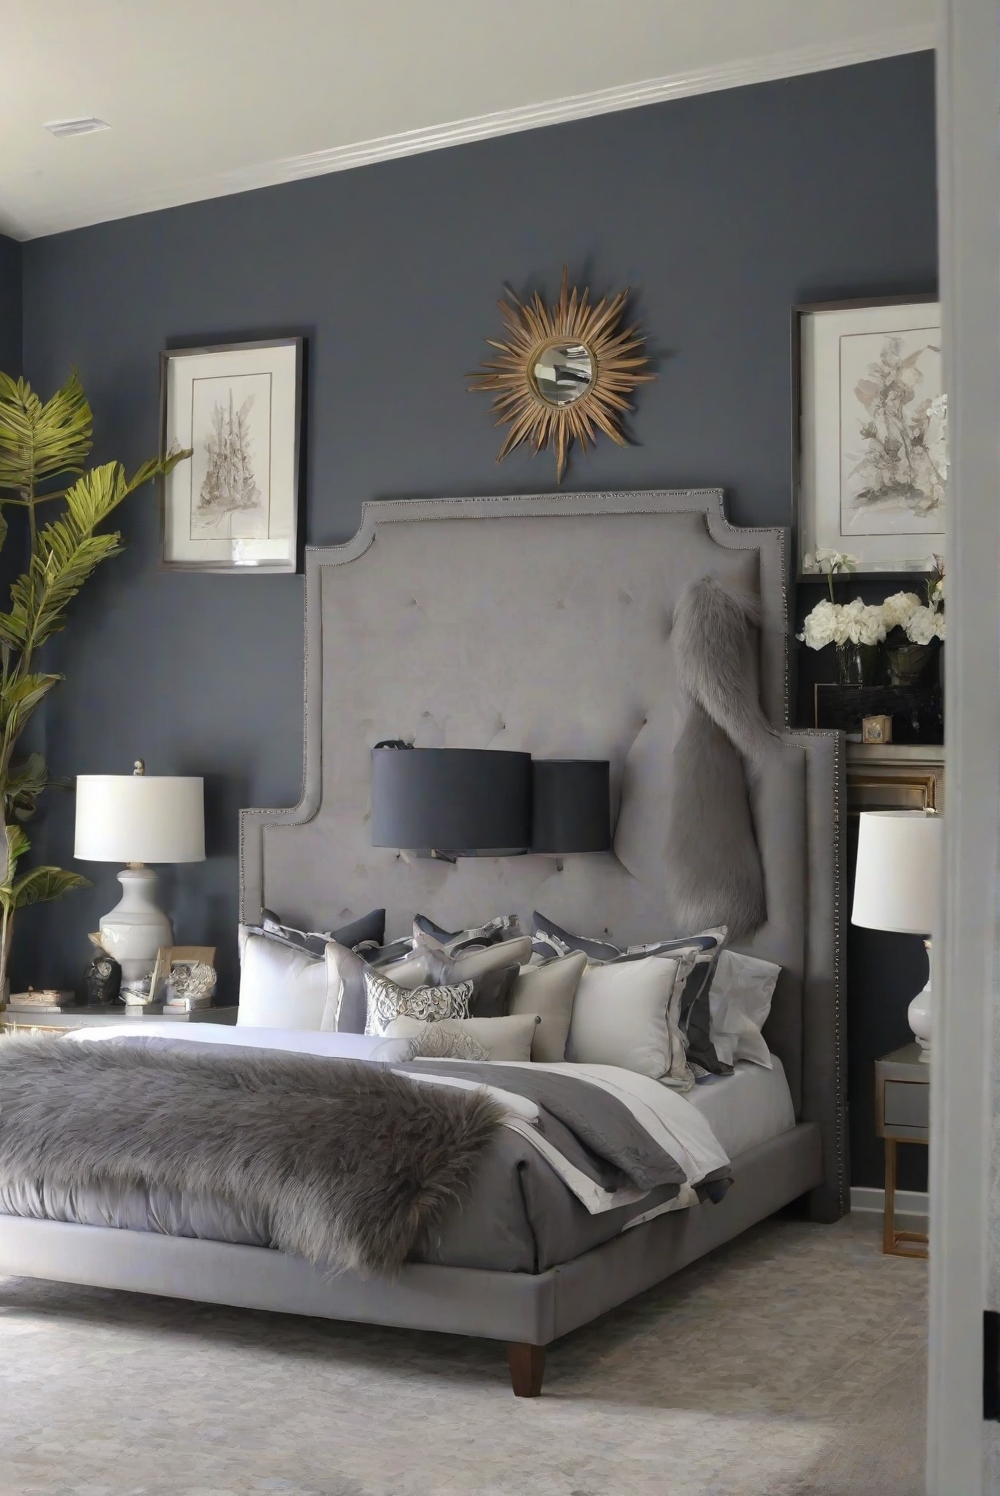 Grizzle Gray paint, Sherwin Williams Grizzle Gray, best gray paint for bedroom, elegant bedroom paint colors, sophisticated bedroom decor, upscale bedroom design, luxurious bedroom color scheme